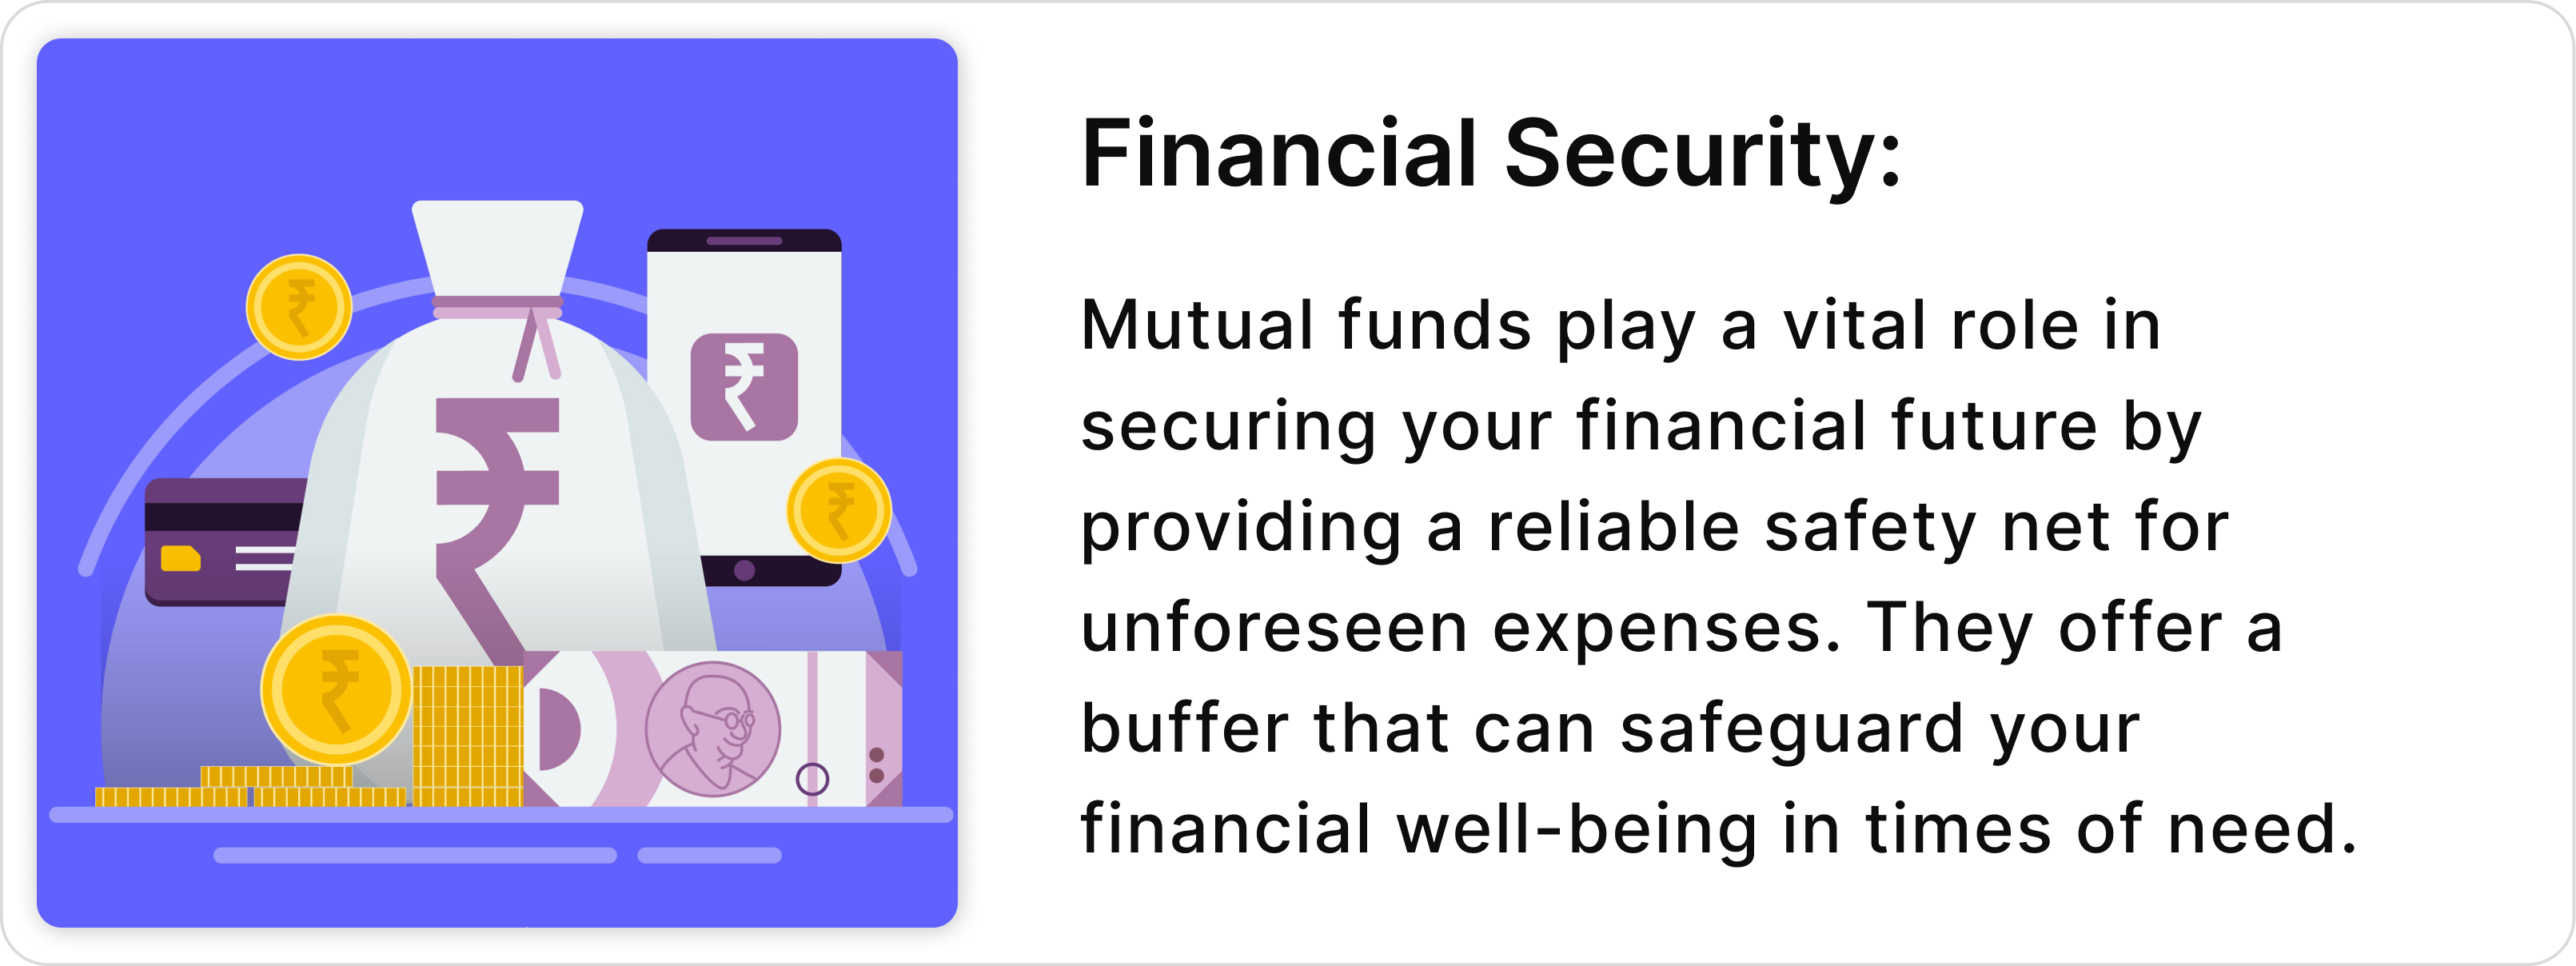 Financial Security_